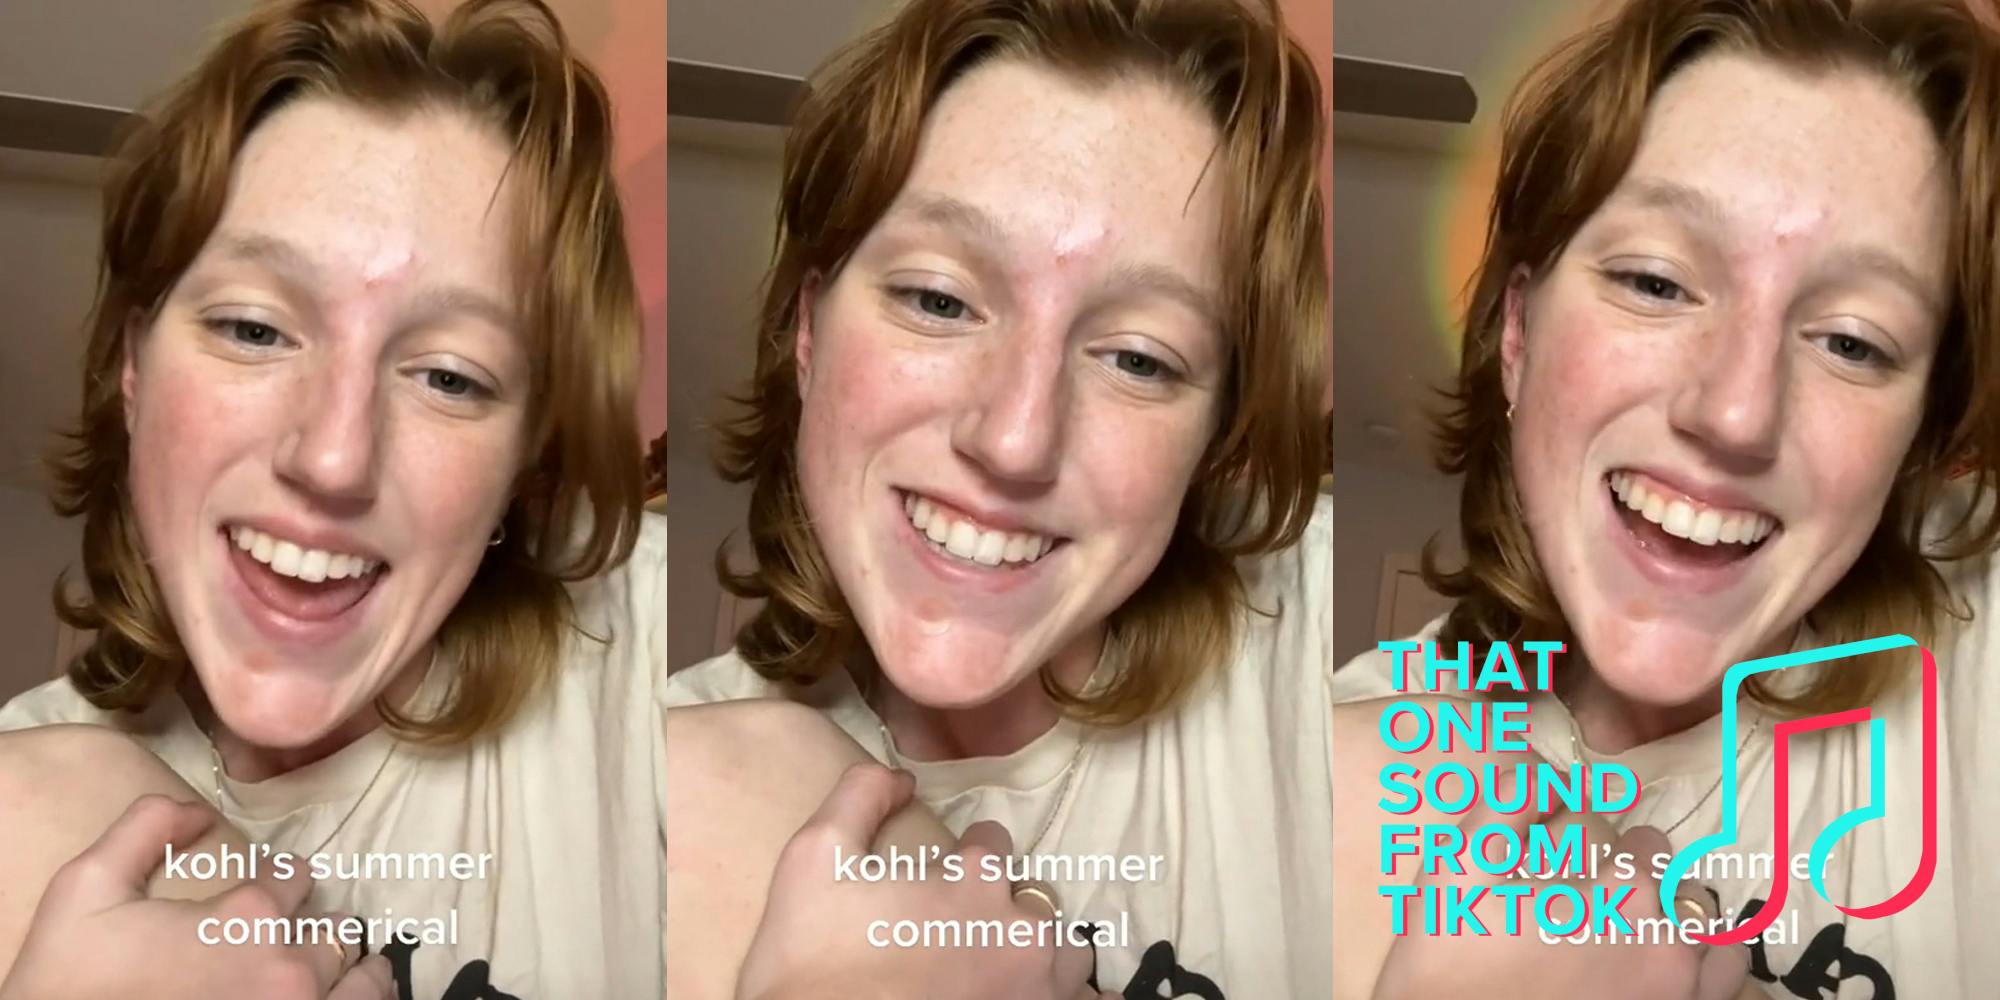 woman speaking with caption "kohl's summer commercial" (l) woman speaking with caption "kohl's summer commercial" (c) woman speaking with caption "kohl's summer commercial" with That One Sound From TikTok logo (r)